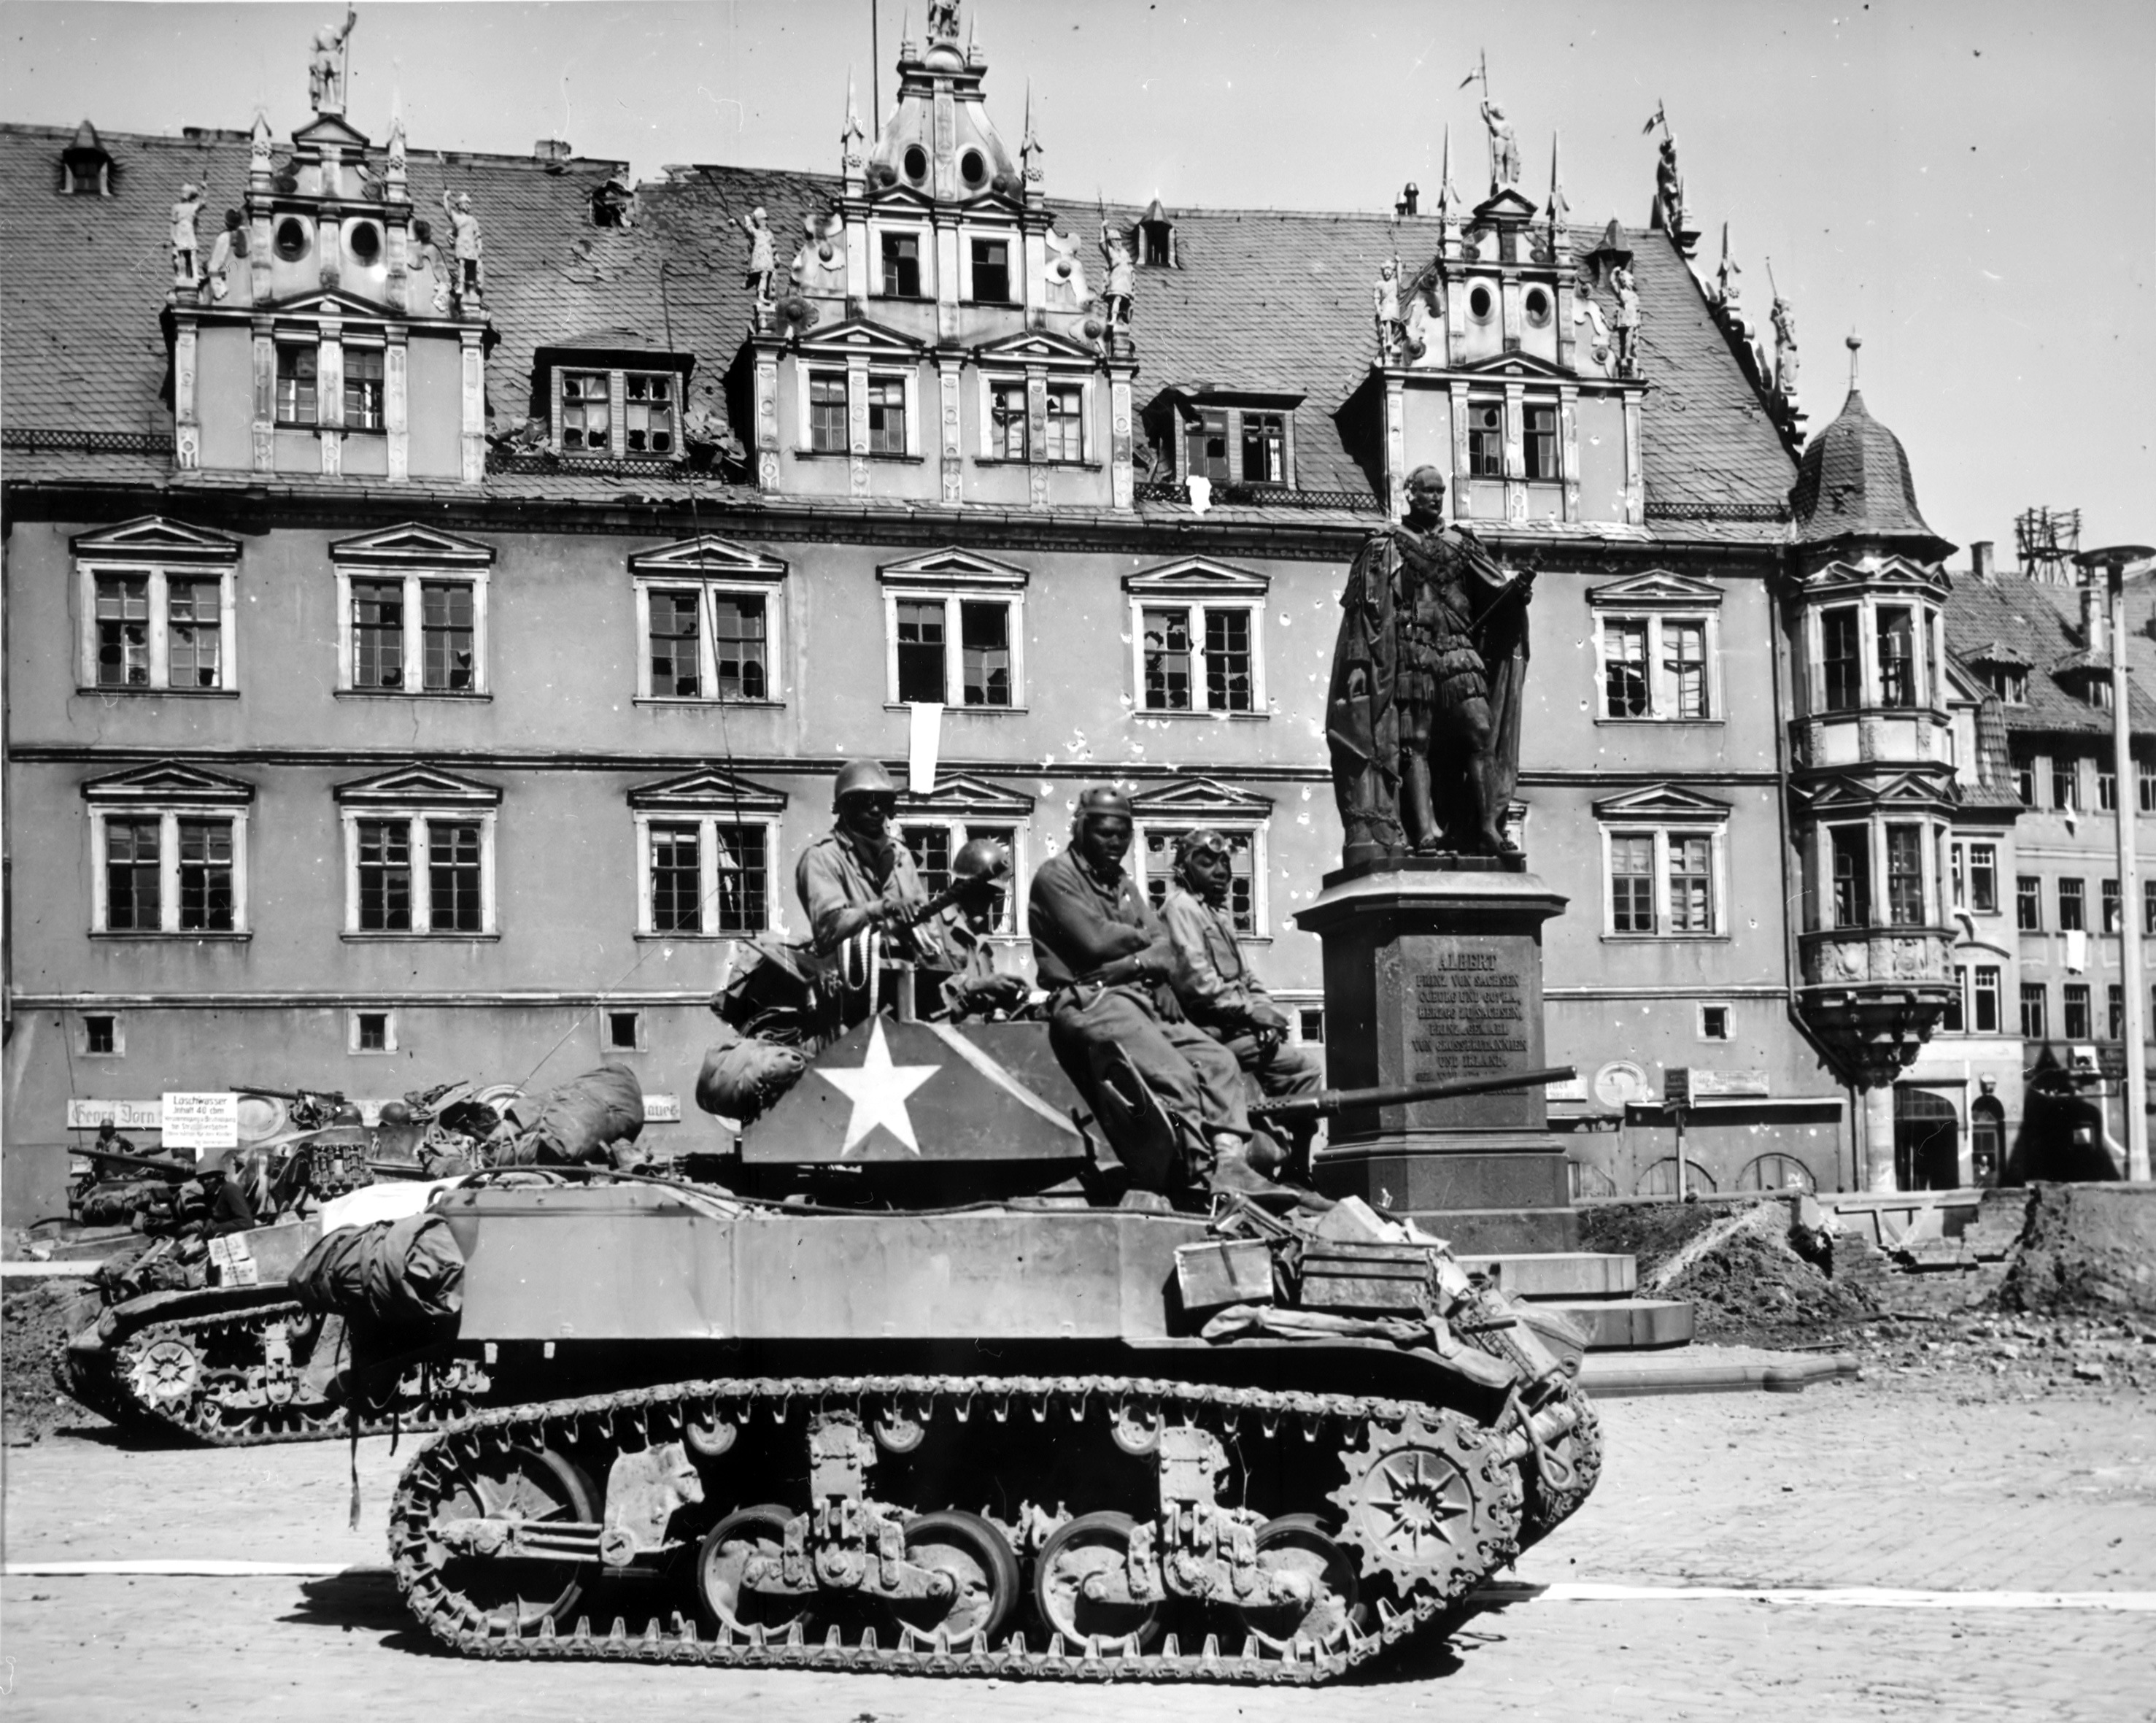 US Army African-American crew of the 761st Tank Battalion on a M5A1 Stuart light tank in Coburg, Bayreuth, Germany, 25 Apr 1945. Note white flags hanging from upper palace windows. Also note evidence that those windows have been machine gunned.